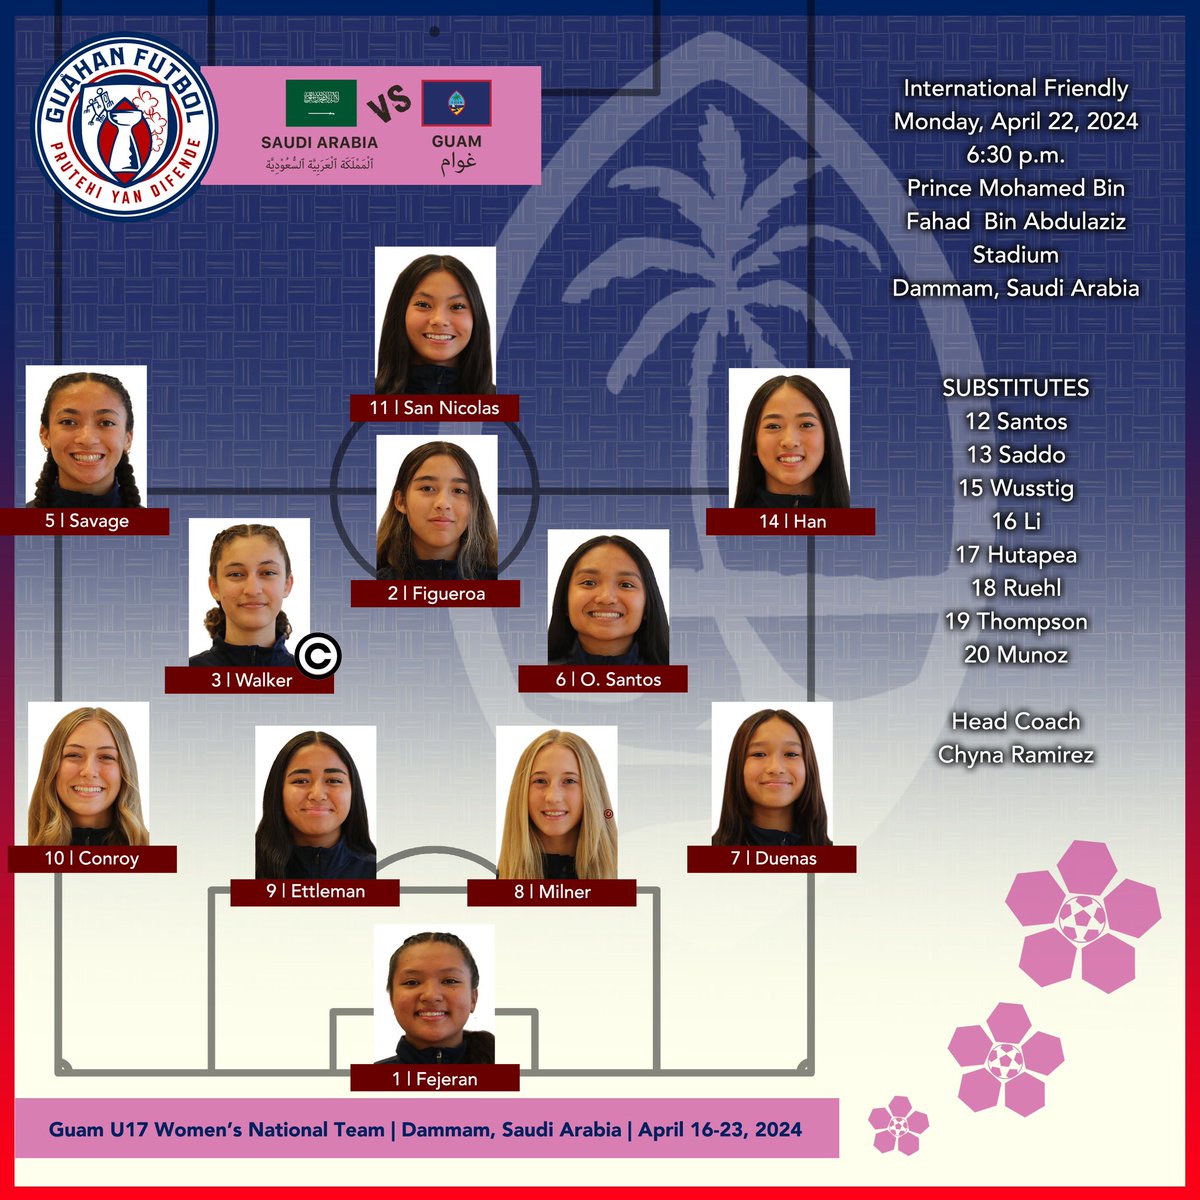 Guam’s starting 11 players will take it to the pitch against Saudi Arabia at the opening whistle of tonight’s international friendly U17 Women’s match beginning at 6:30 pm local time (1:30 am Guam time) Link: saff.sa/WIa1Q #GuamFootball #GuahanFutbol #BibaGuahan